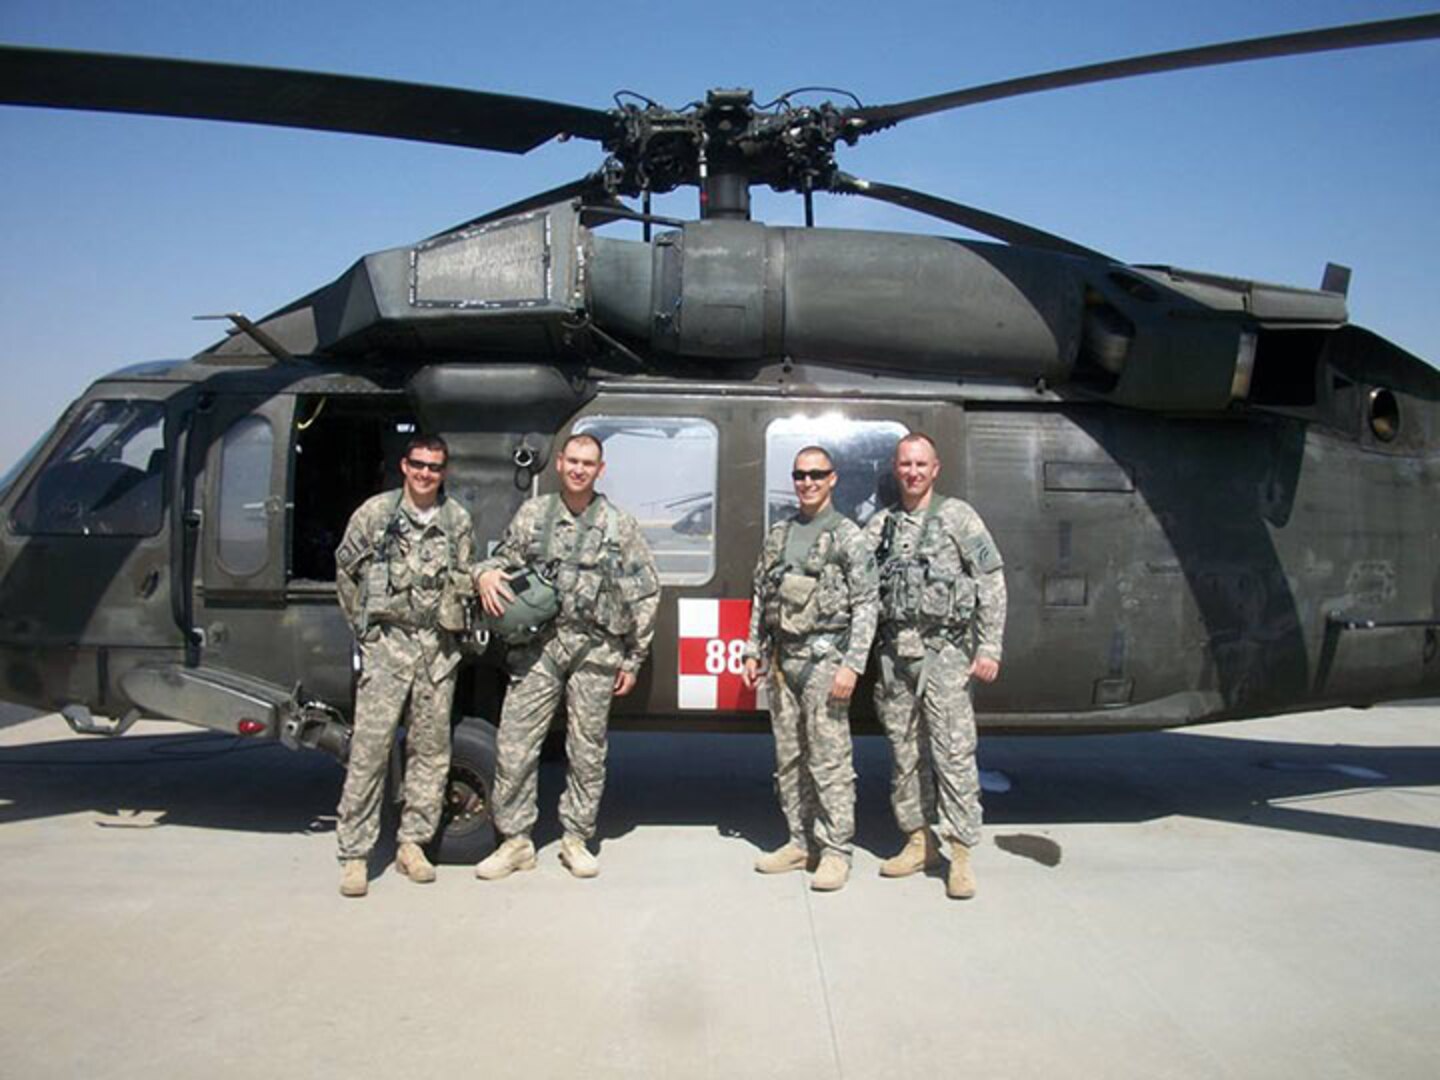 New York Army National Guard Maj. Stephen Carson, second from left, is seen with his aeromedical flight crew at Udairi Airfield after a mission during his deployment to Kuwait in 2013-14. Carson, then a captain, served as a Physician’s Assistant in support of the New York Army National Guard’s 642nd Support Battalion, part of the 42nd Combat Aviation Brigade.